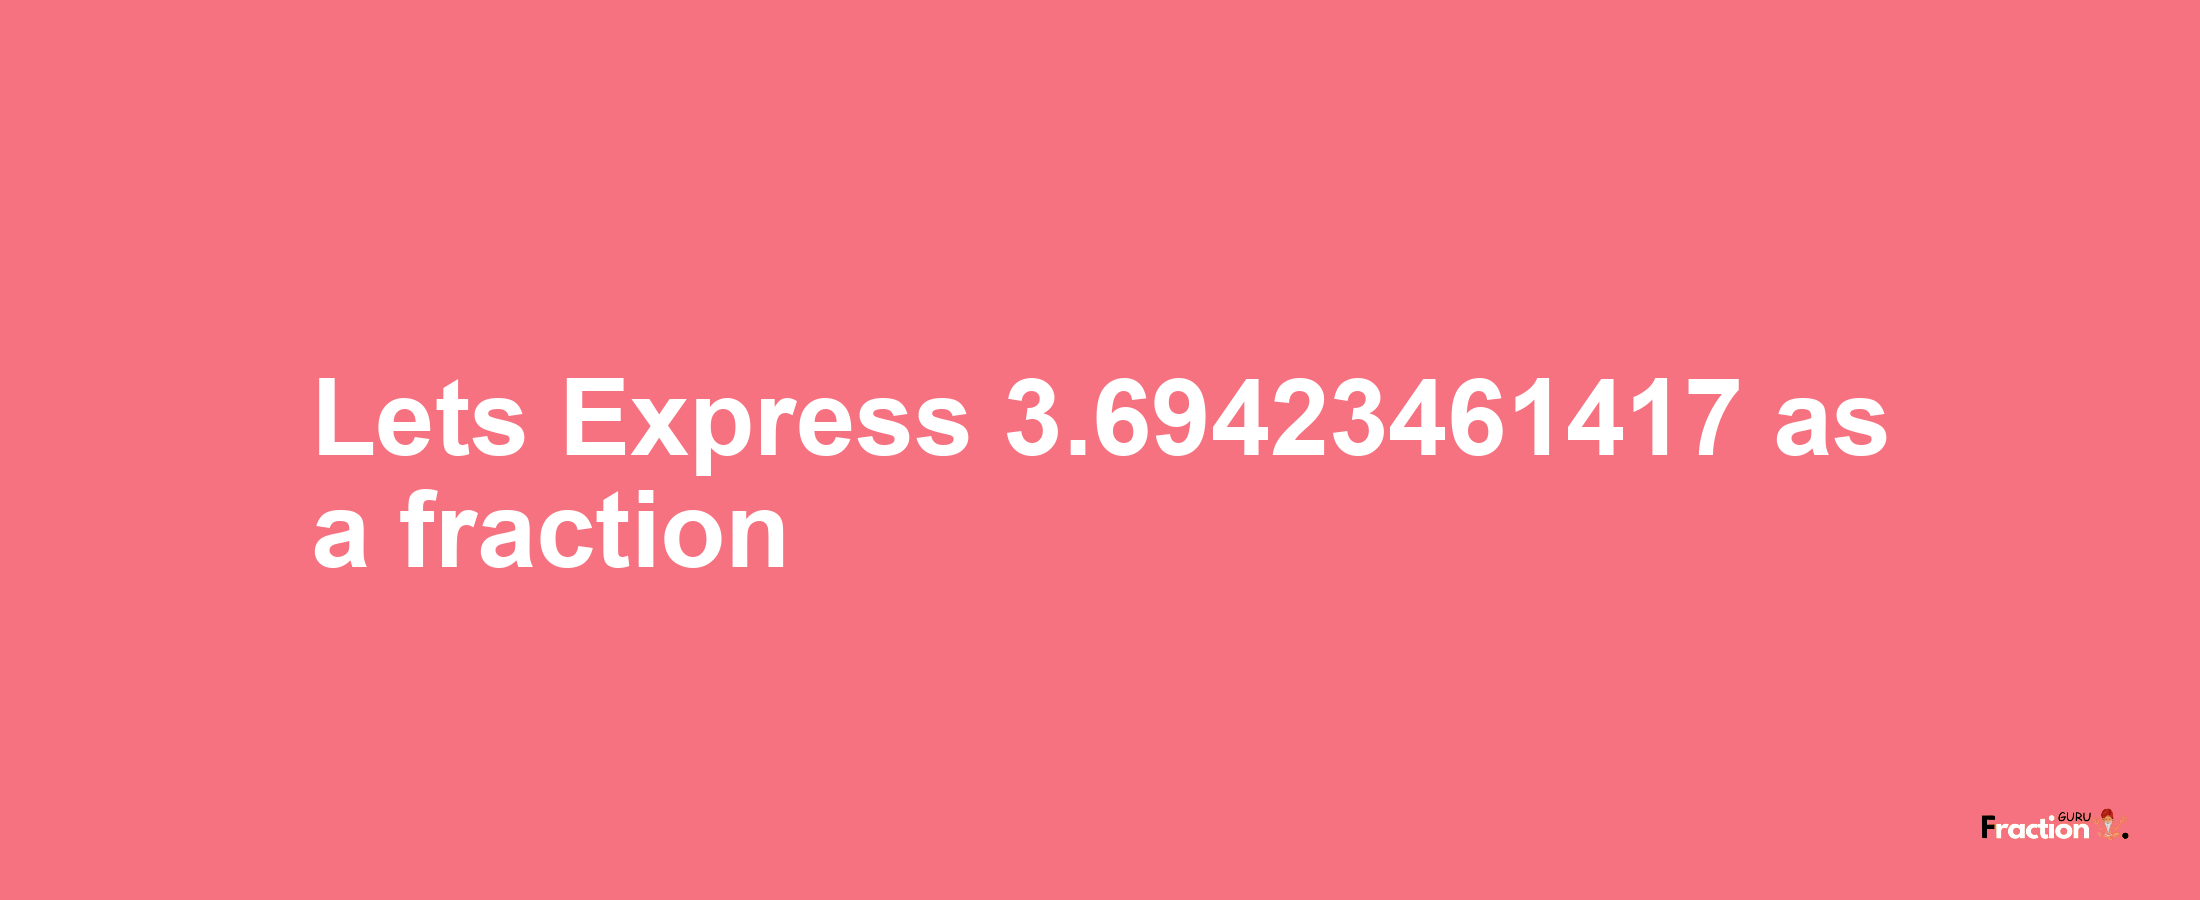 Lets Express 3.69423461417 as afraction